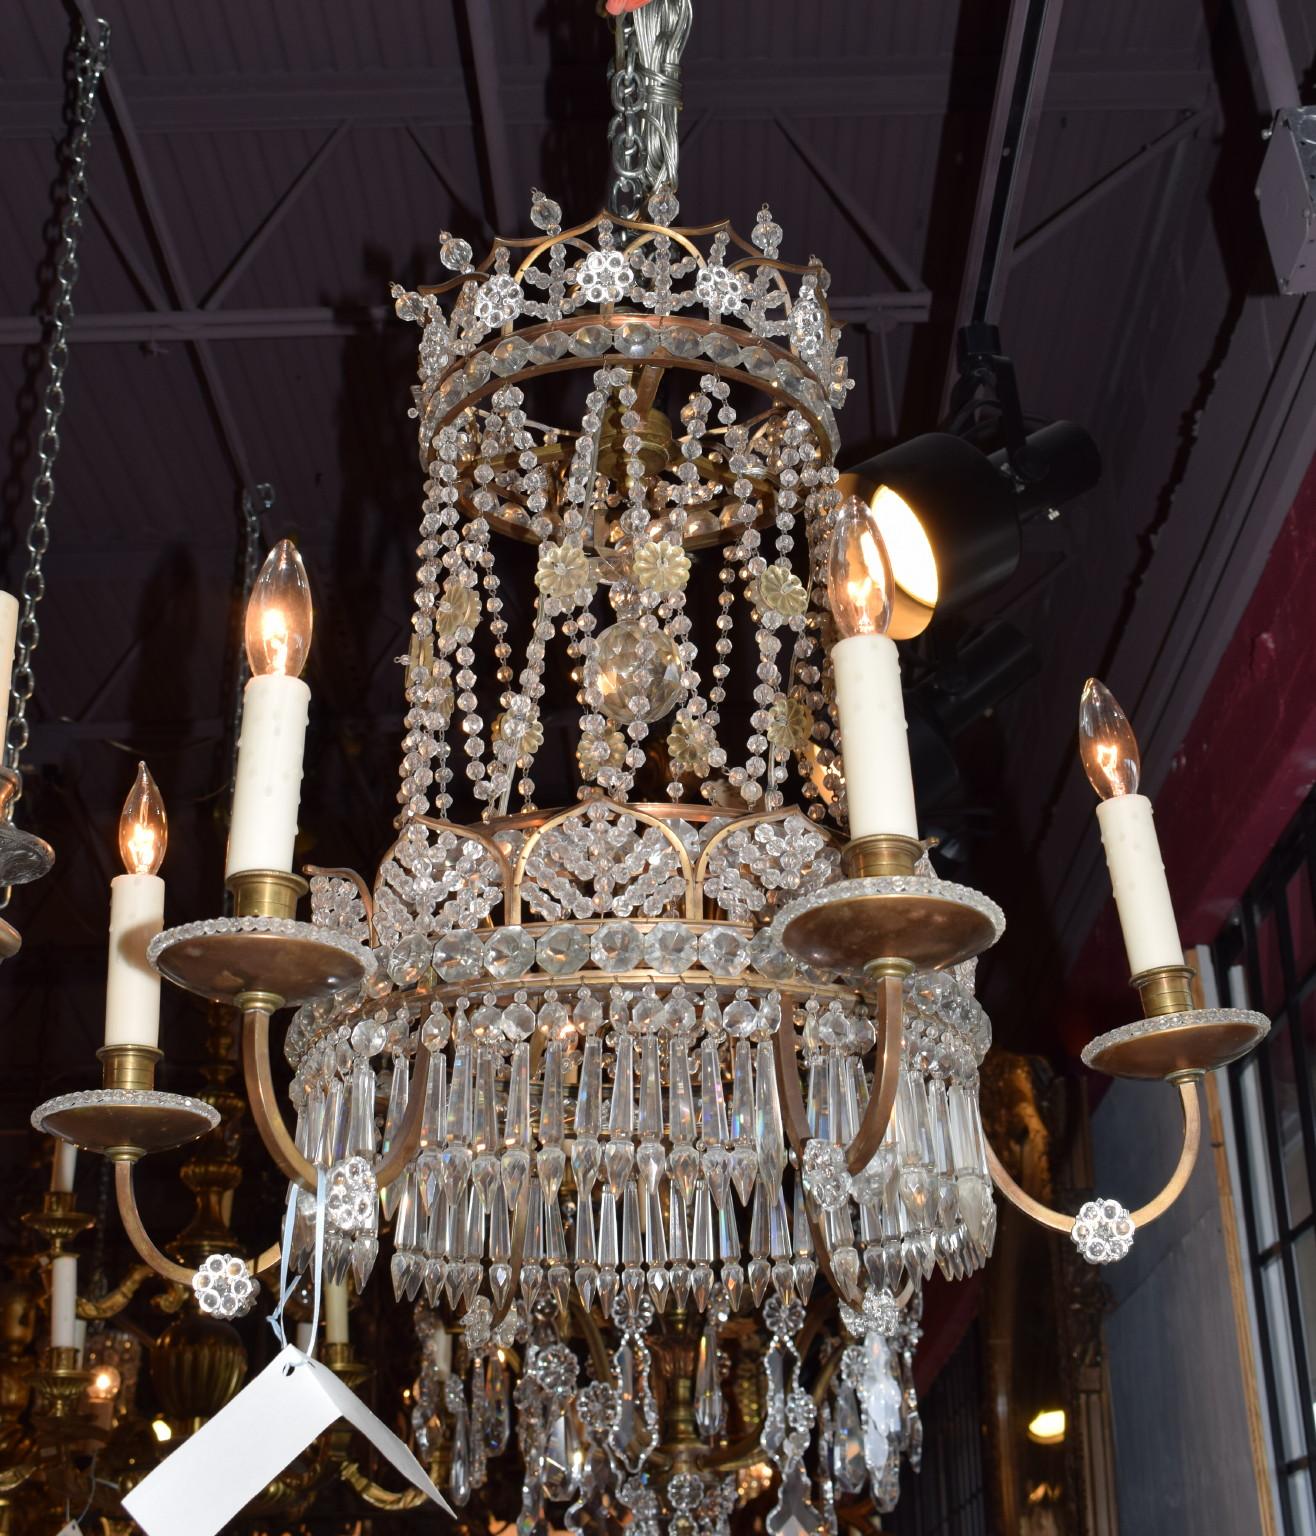 A superb silver over bronze and crystal Baltic chandelier. 6 lights.
Finland, circa 1900. 
Dimensions: Height 23 1/2